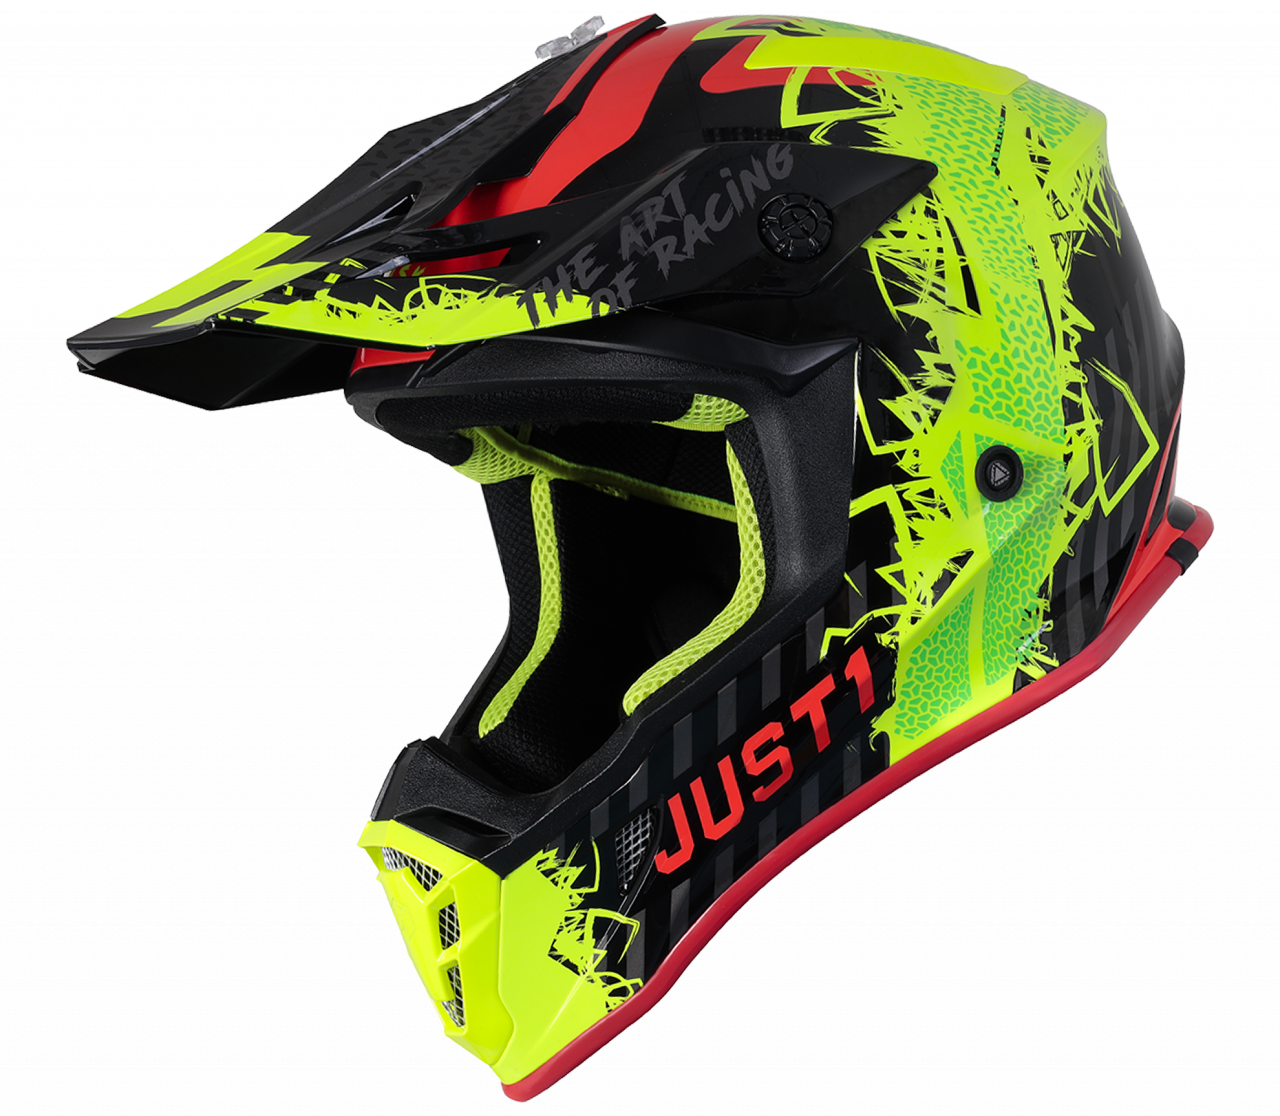 J38 Mask Fluo Yellow Red Black